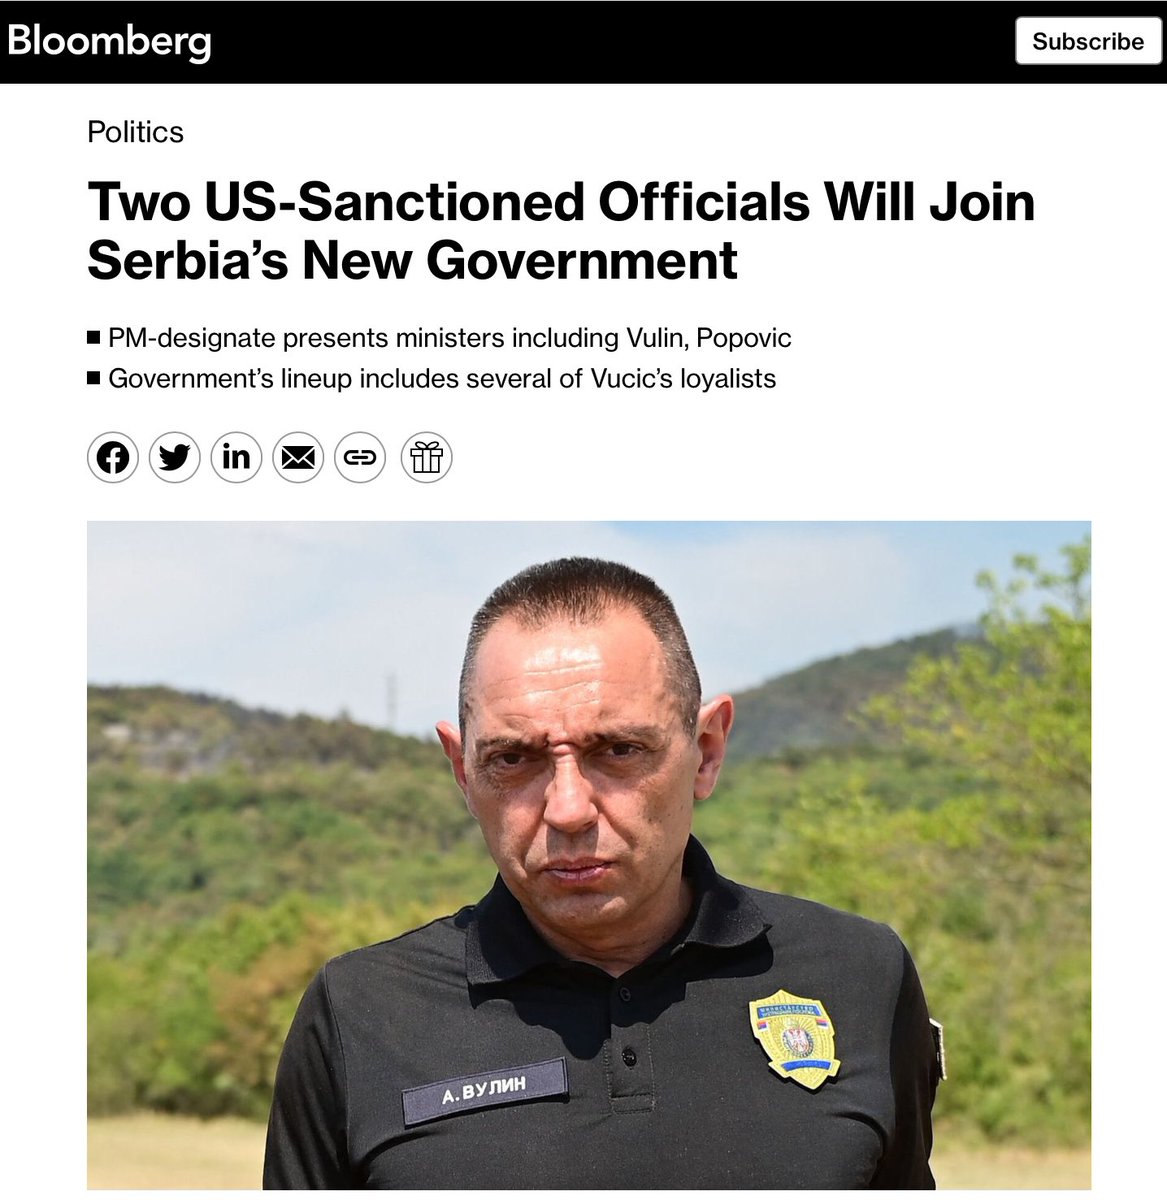 The new Serbian govt led by @Milos_Vucevic will include two US-sanctioned hardliners, Aleksandar Vulin & @NPopovicSNP, and ultra-nationalist firebrand @MilicaZavetnica. All of them are known for their unashamed Putinist positions. Vucic is making a sharp turn towards the East.